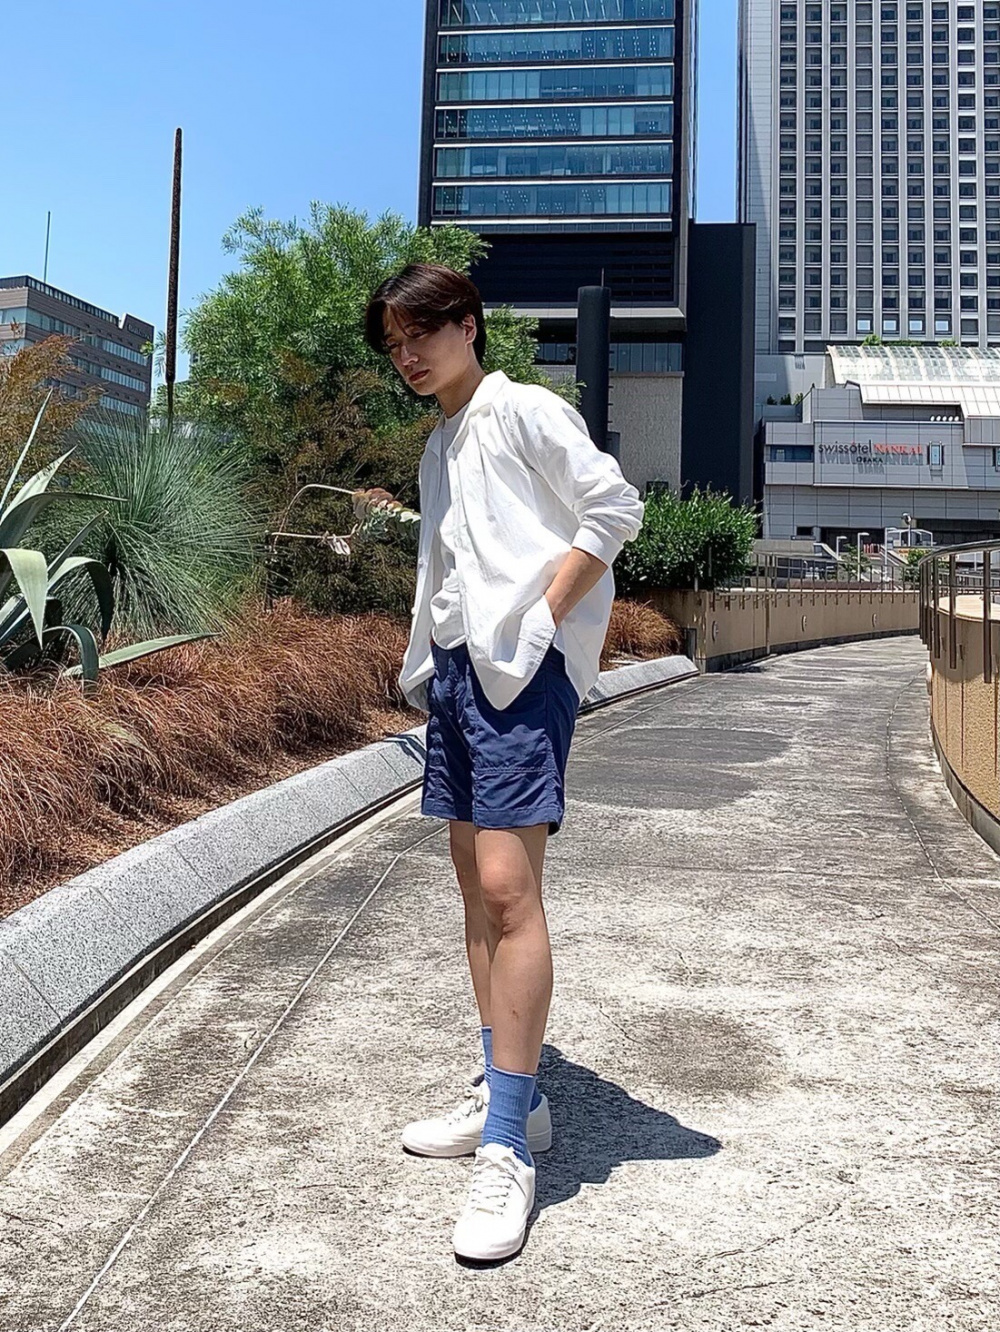 Check styling ideas for「Nylon Utility Geared Shorts」